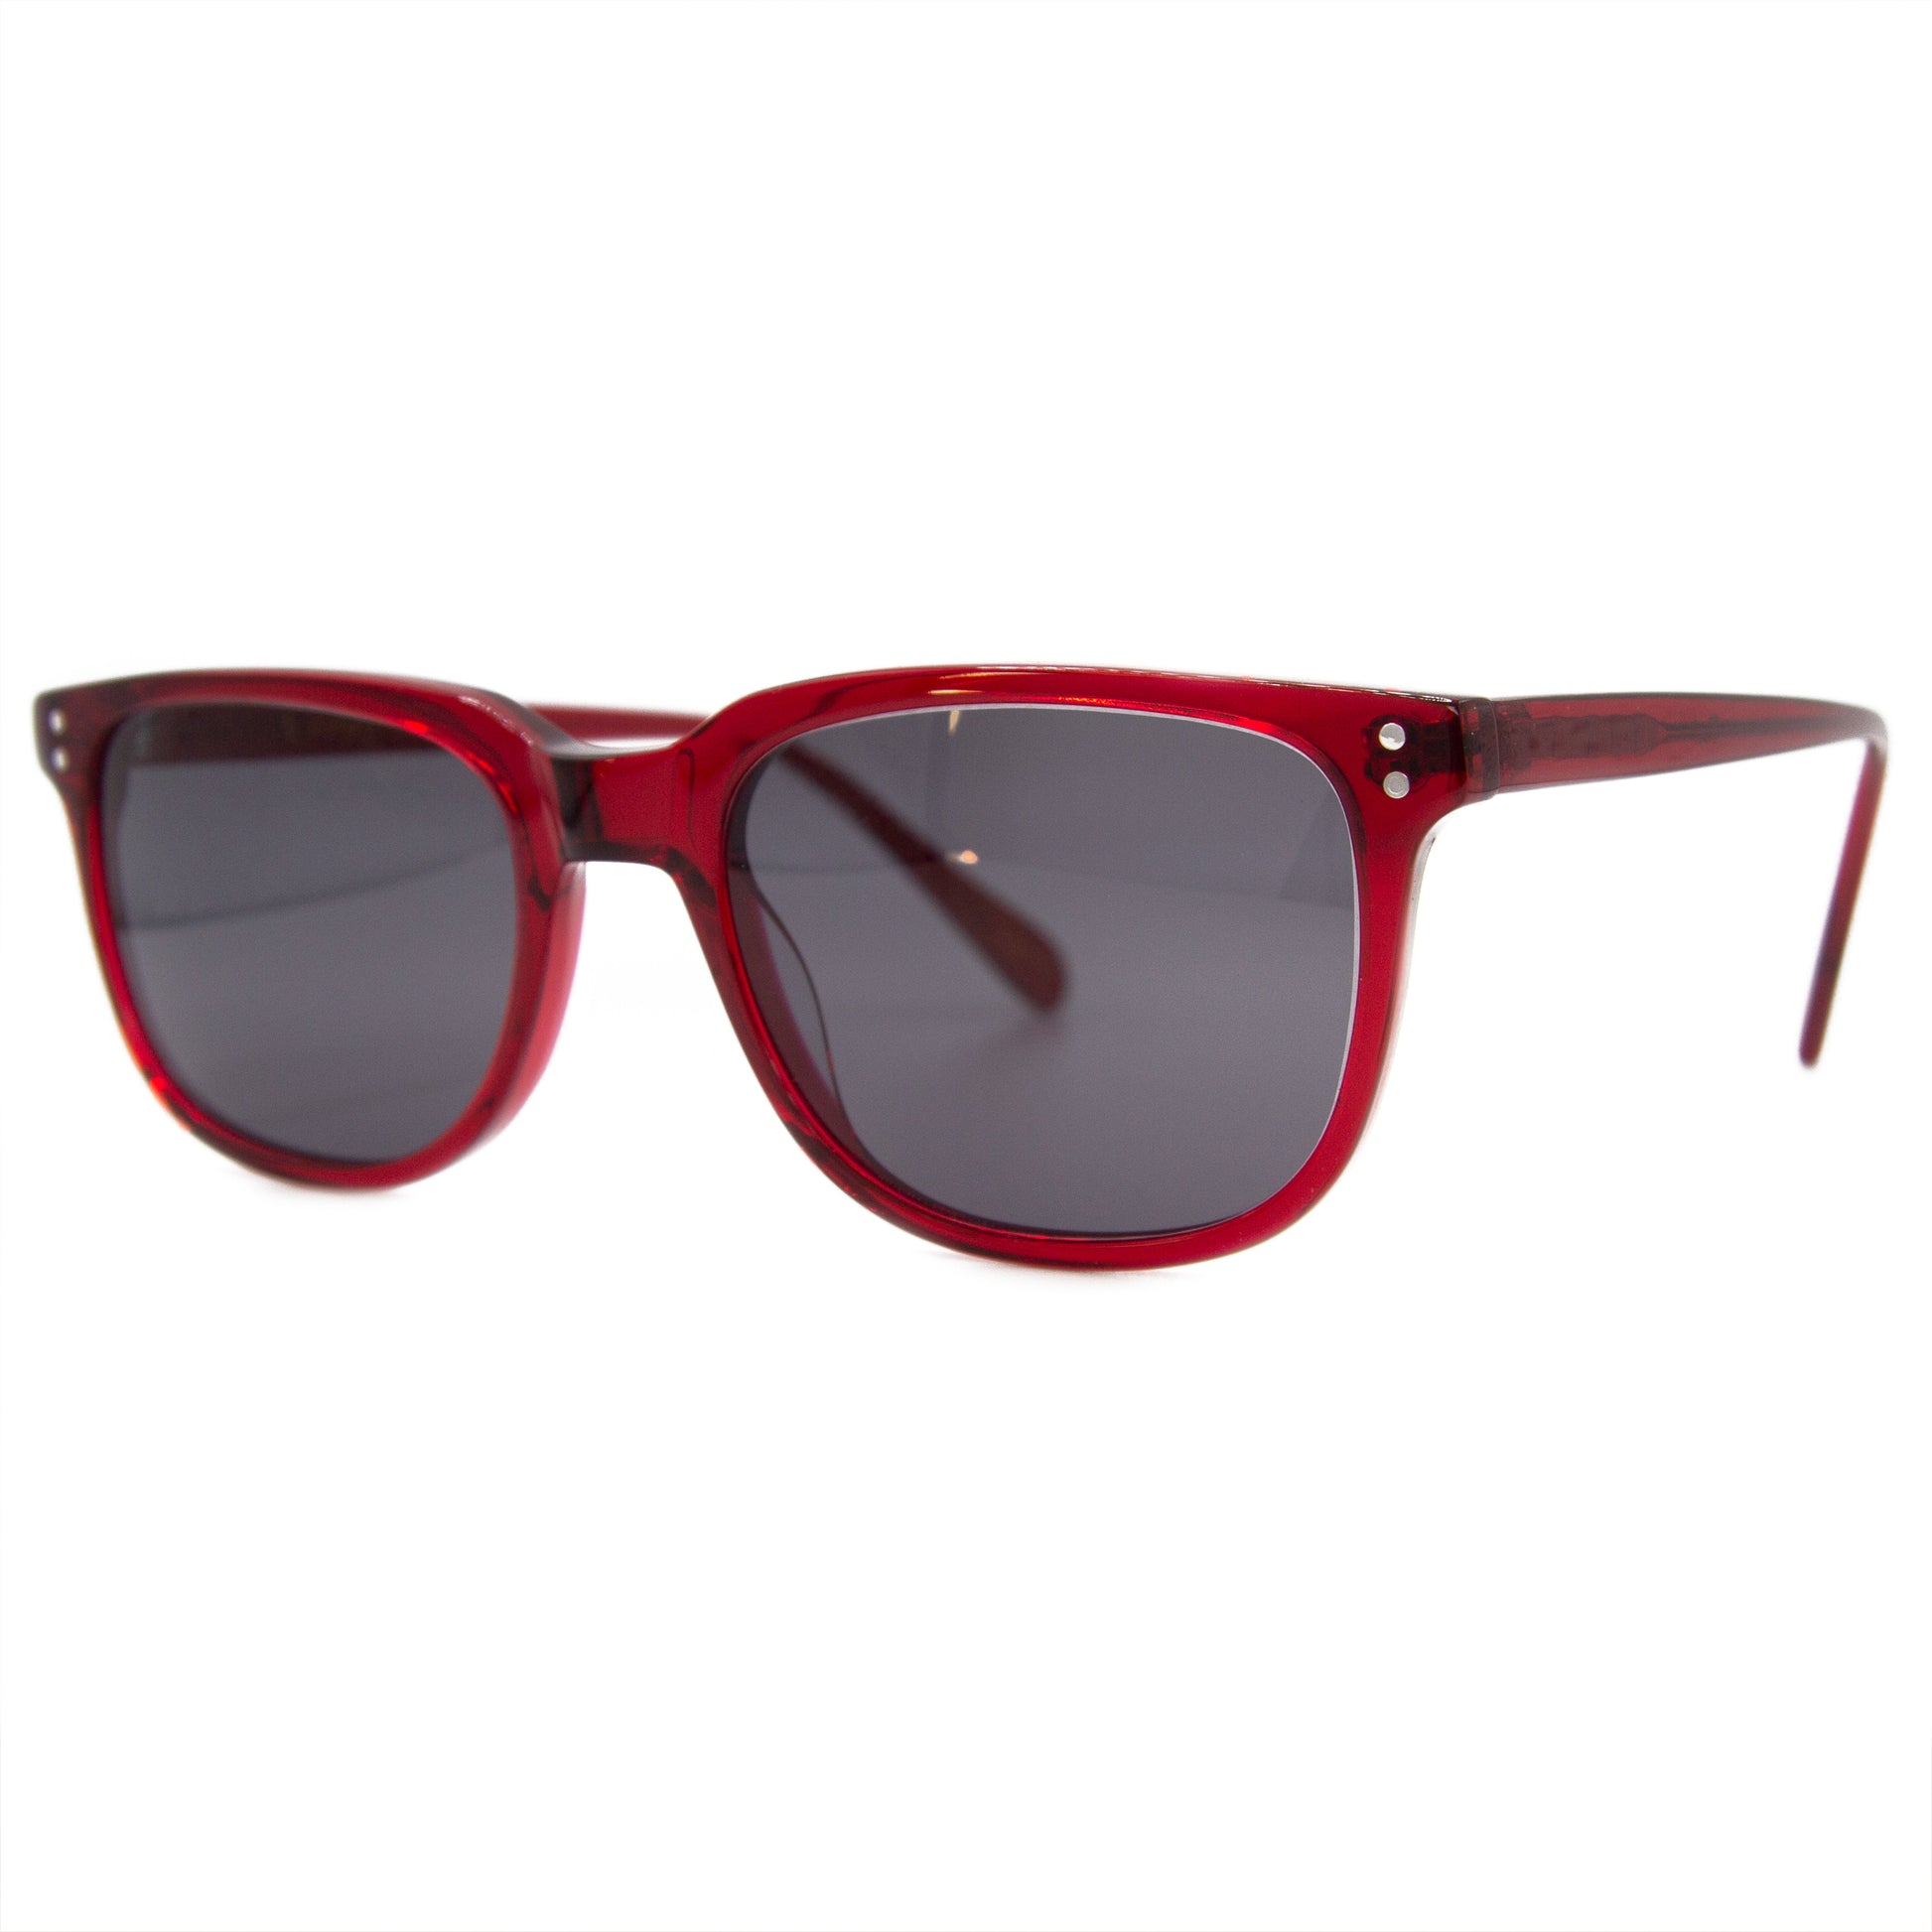 3 brothers - Theo - Red - Prescription Sunglasses - Side